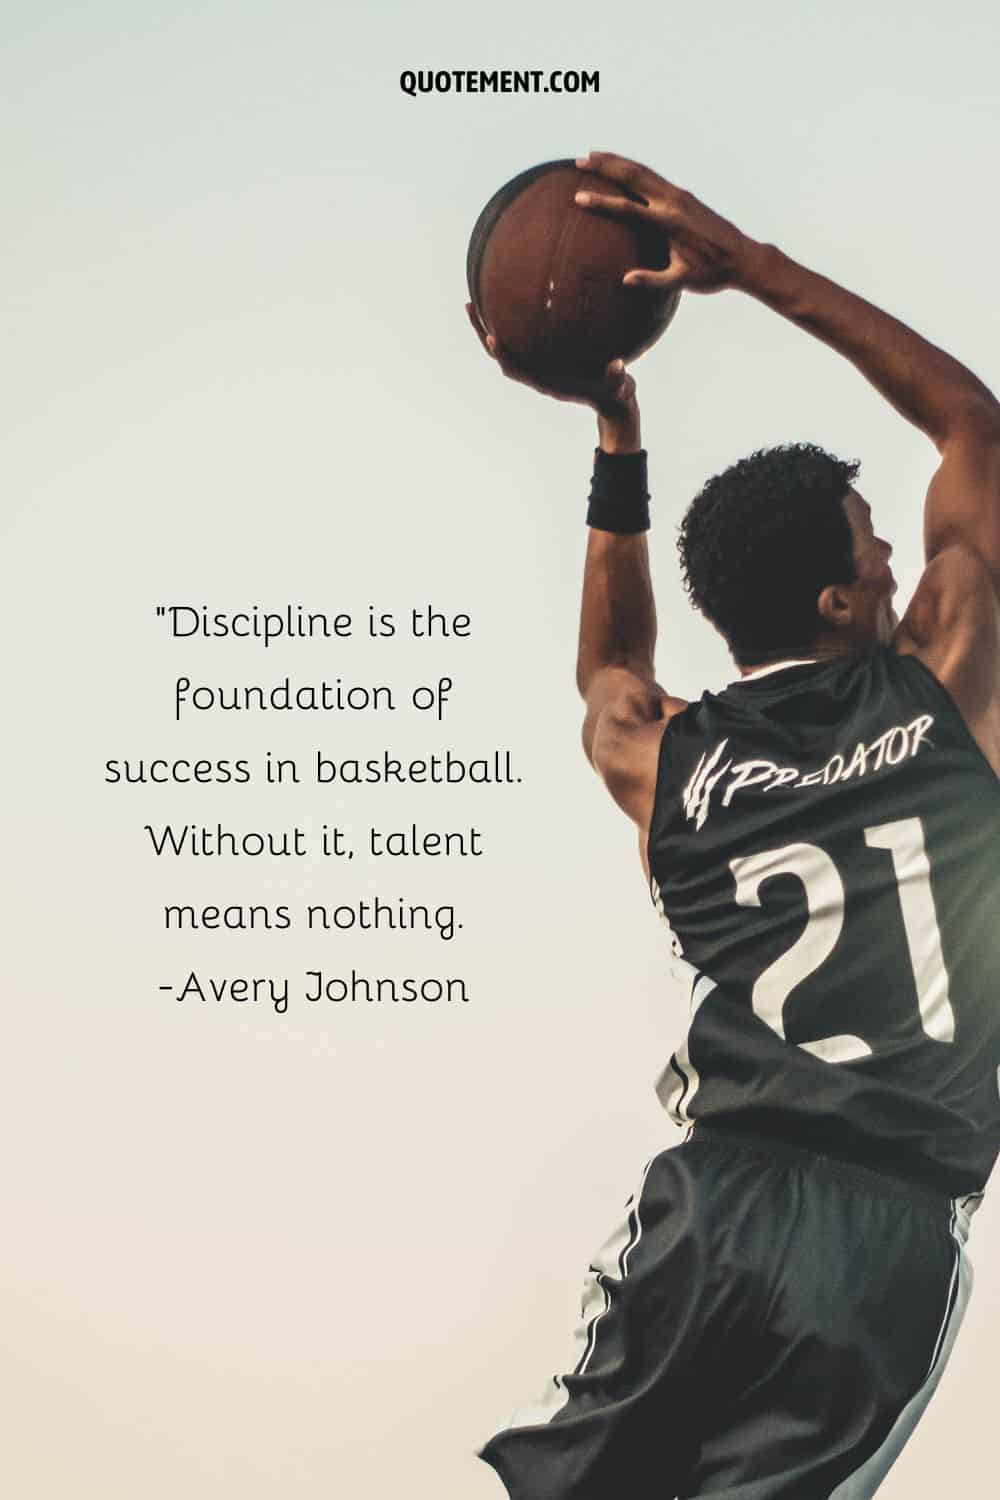 Discipline is the foundation of success in basketball. Without it, talent means nothing